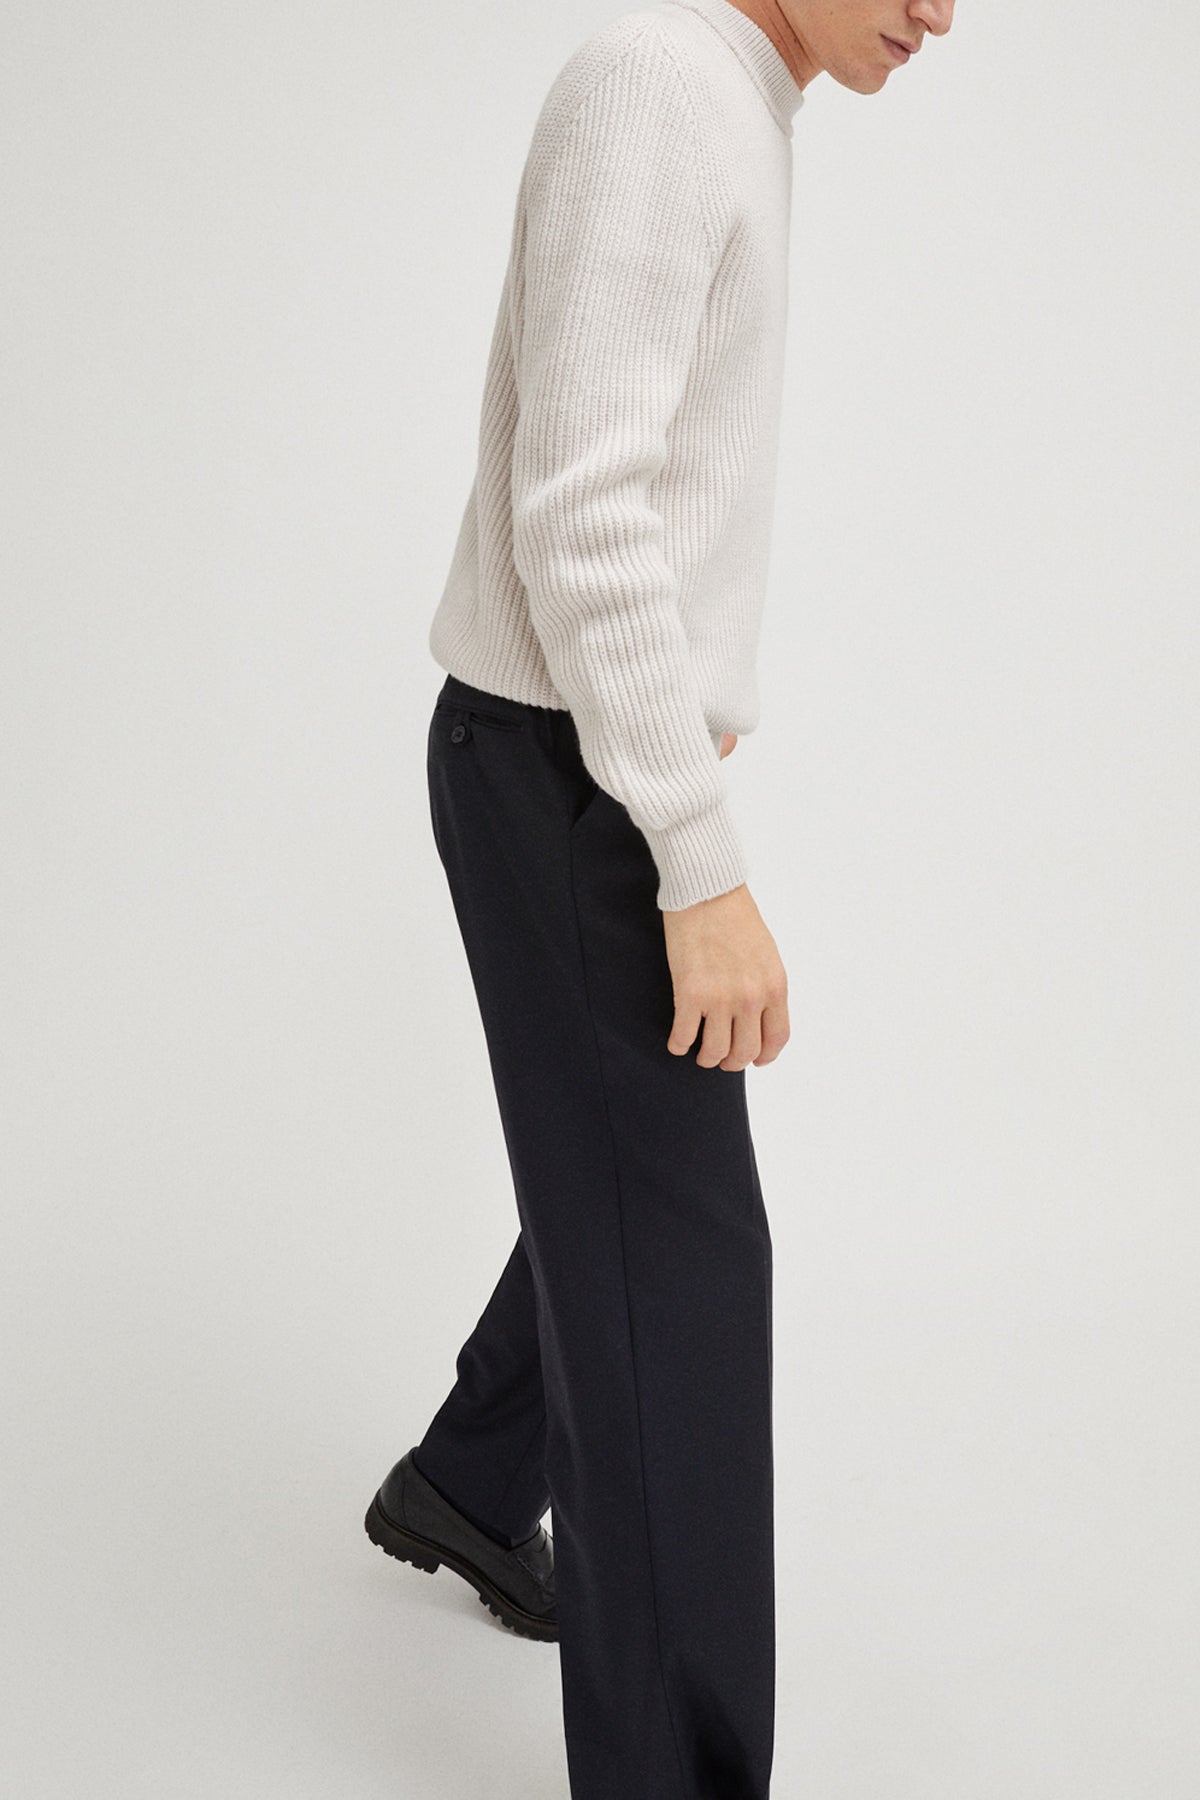 Pearl | The Merino Wool Perkins Sweater – Imperfect Version